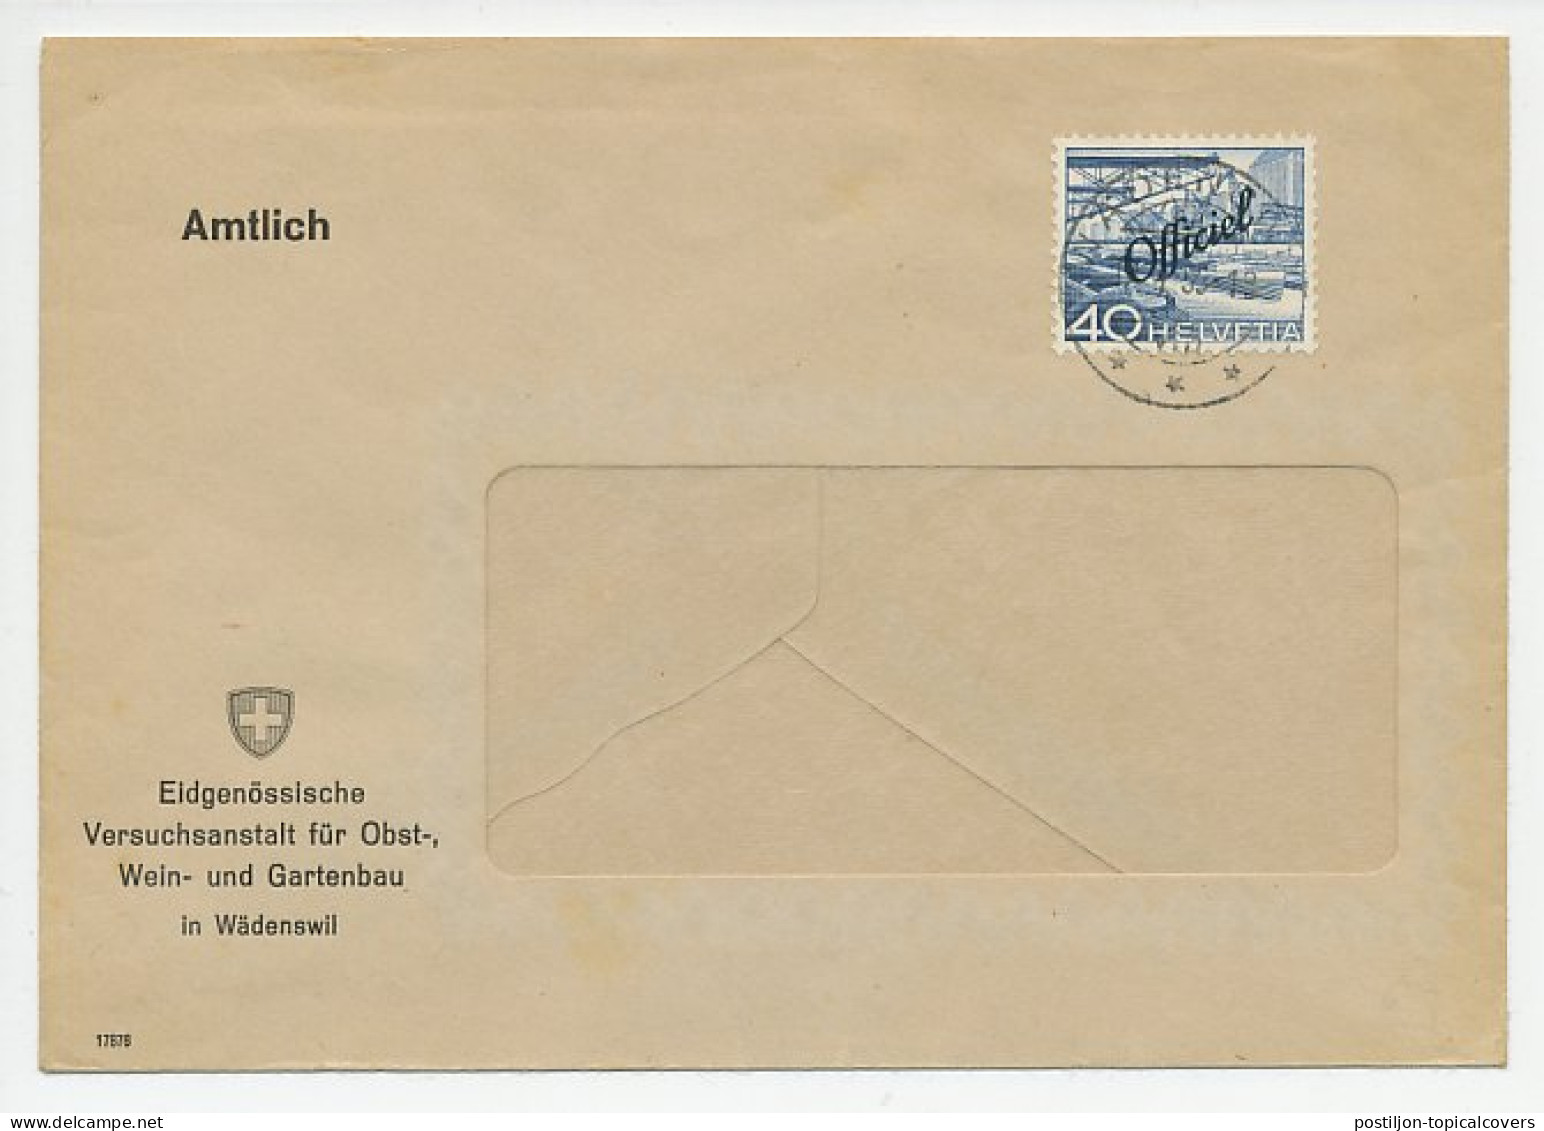 Official Service Cover / Postmark Switzerland 1955 Federal Research Institute For Fruit, Wine And Horticulture - Vinos Y Alcoholes